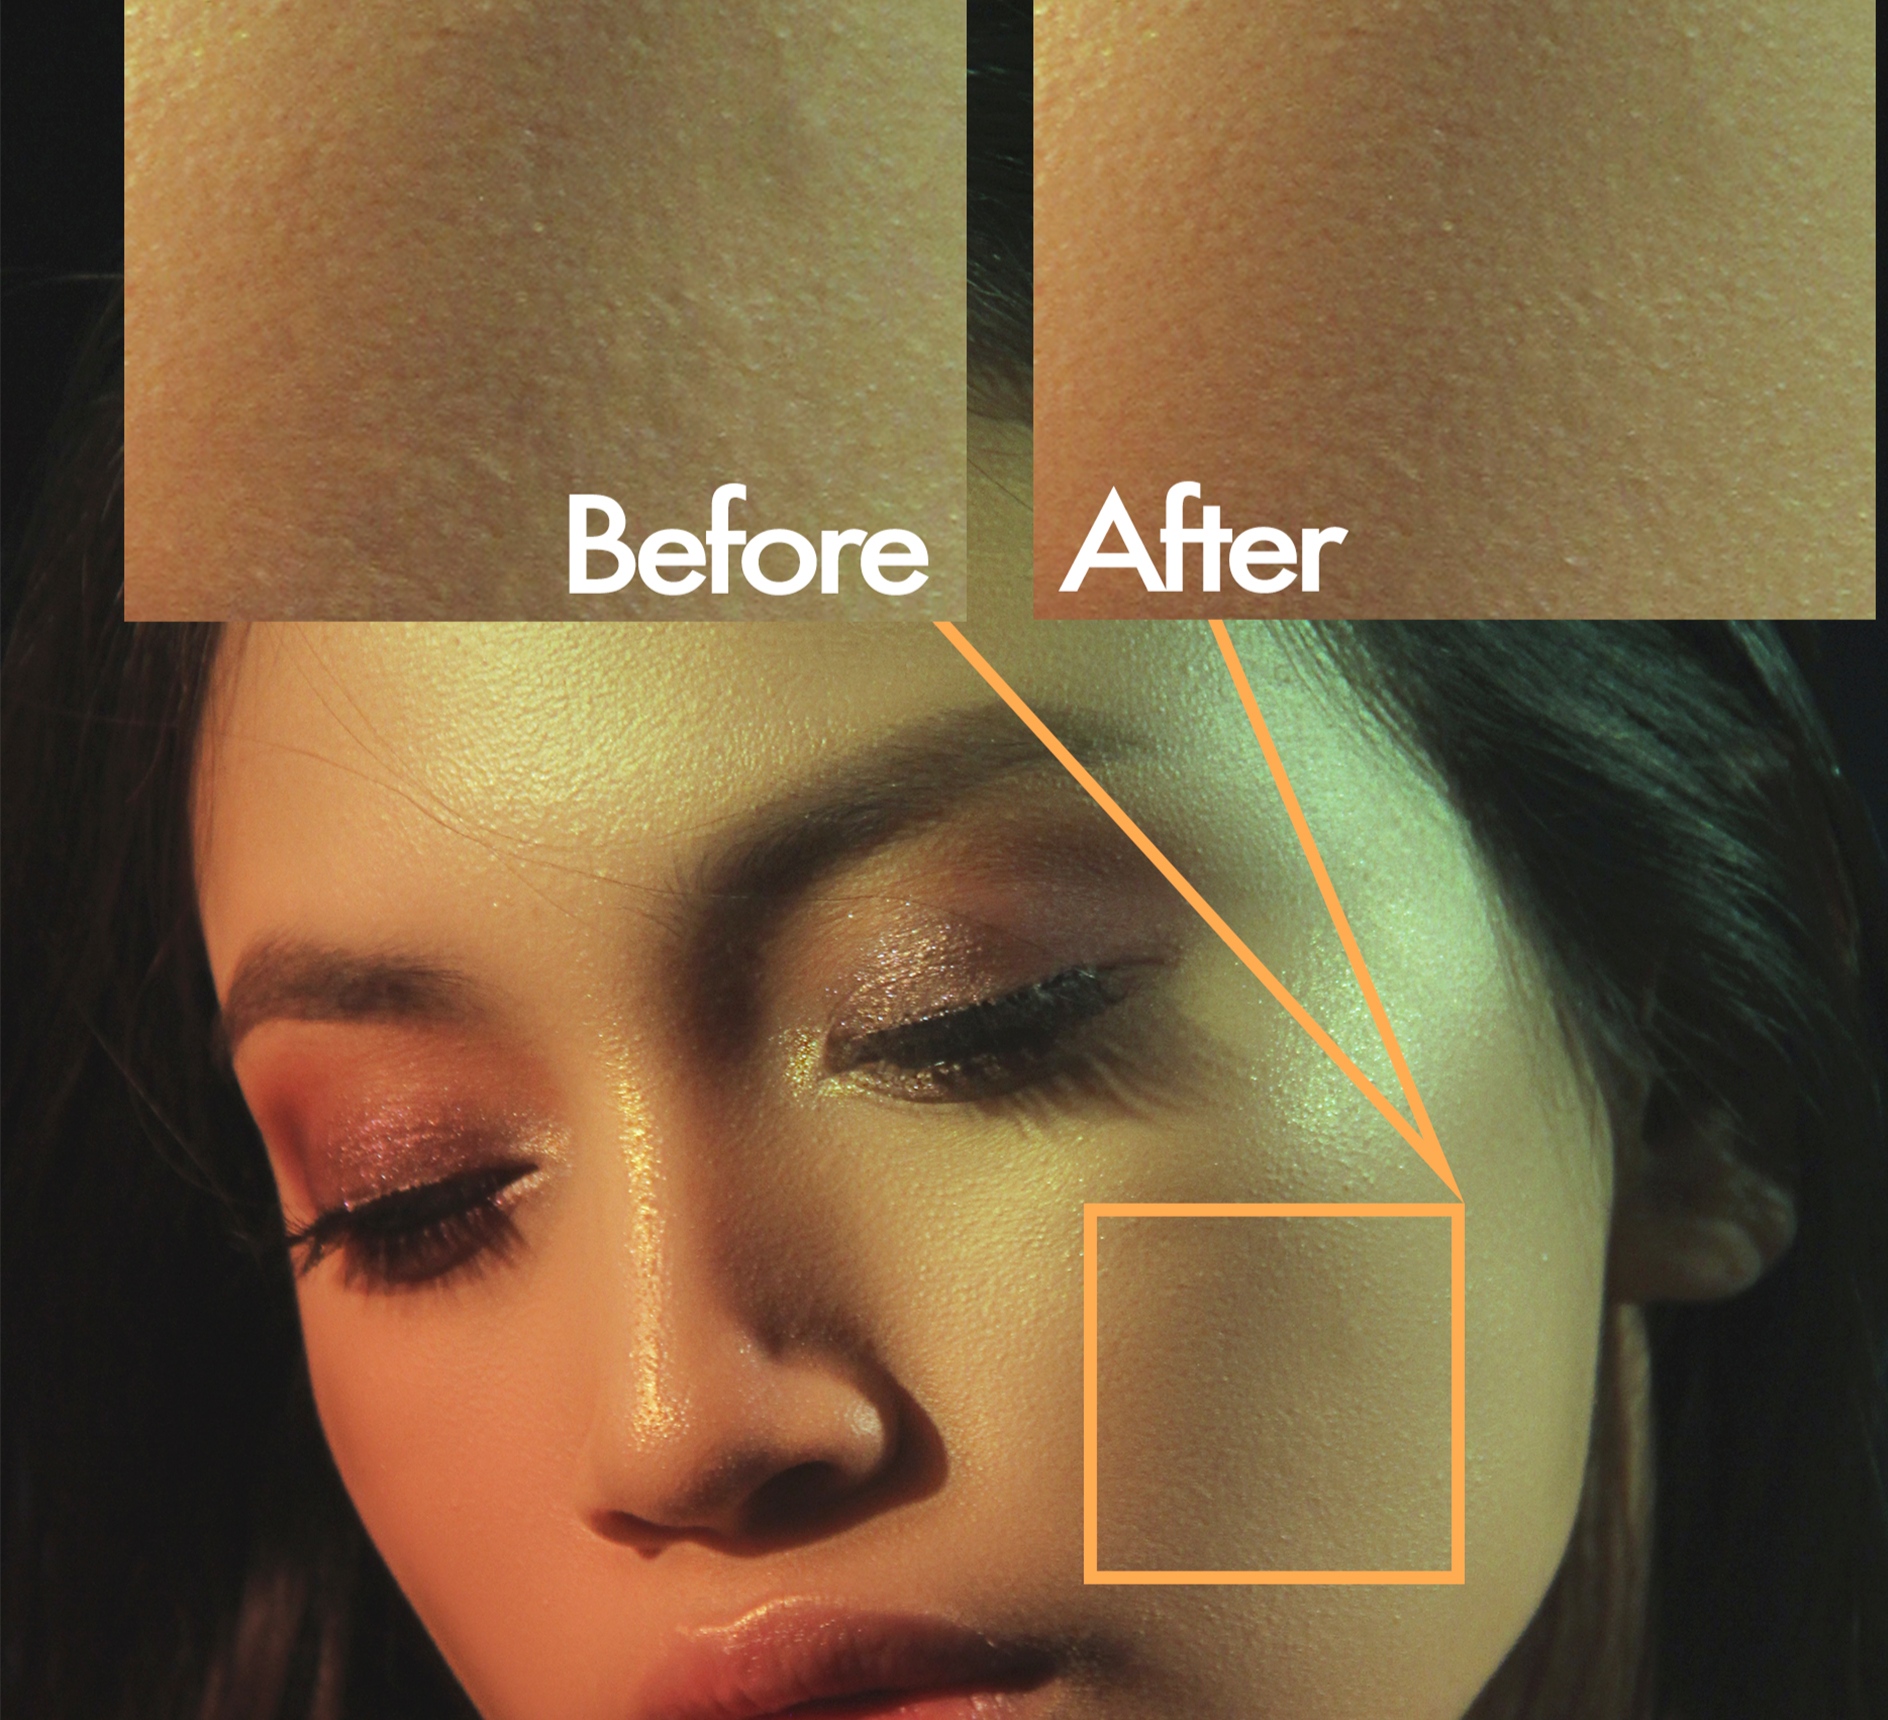 5 TIPS FOR PROFESSIONAL IMAGE RETOUCH SERVICE